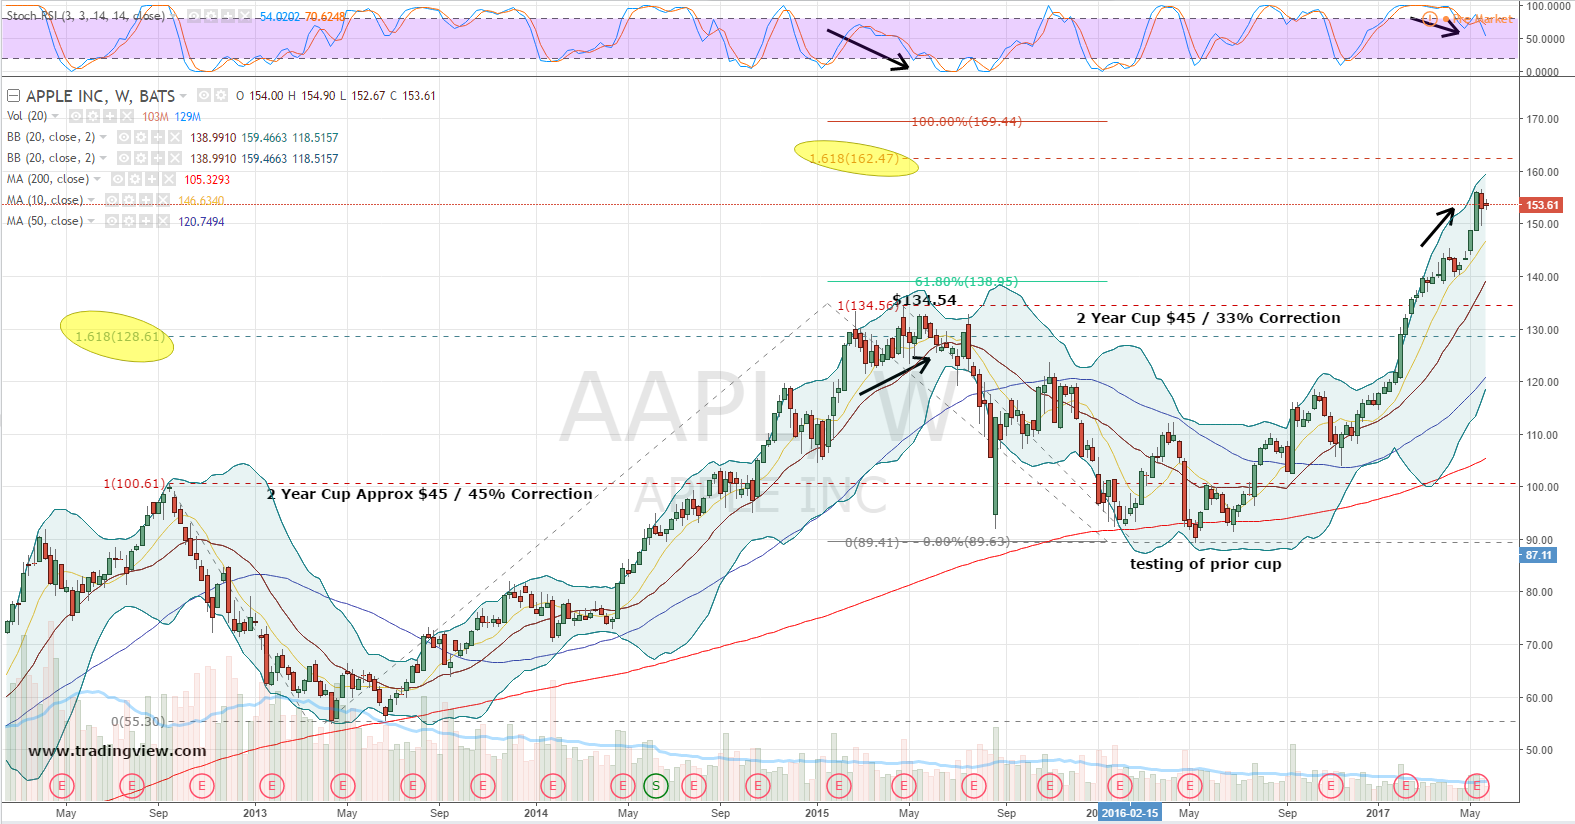 Apple Inc. (AAPL) Stock Is Souring, But This Trade Is Sweet | InvestorPlace